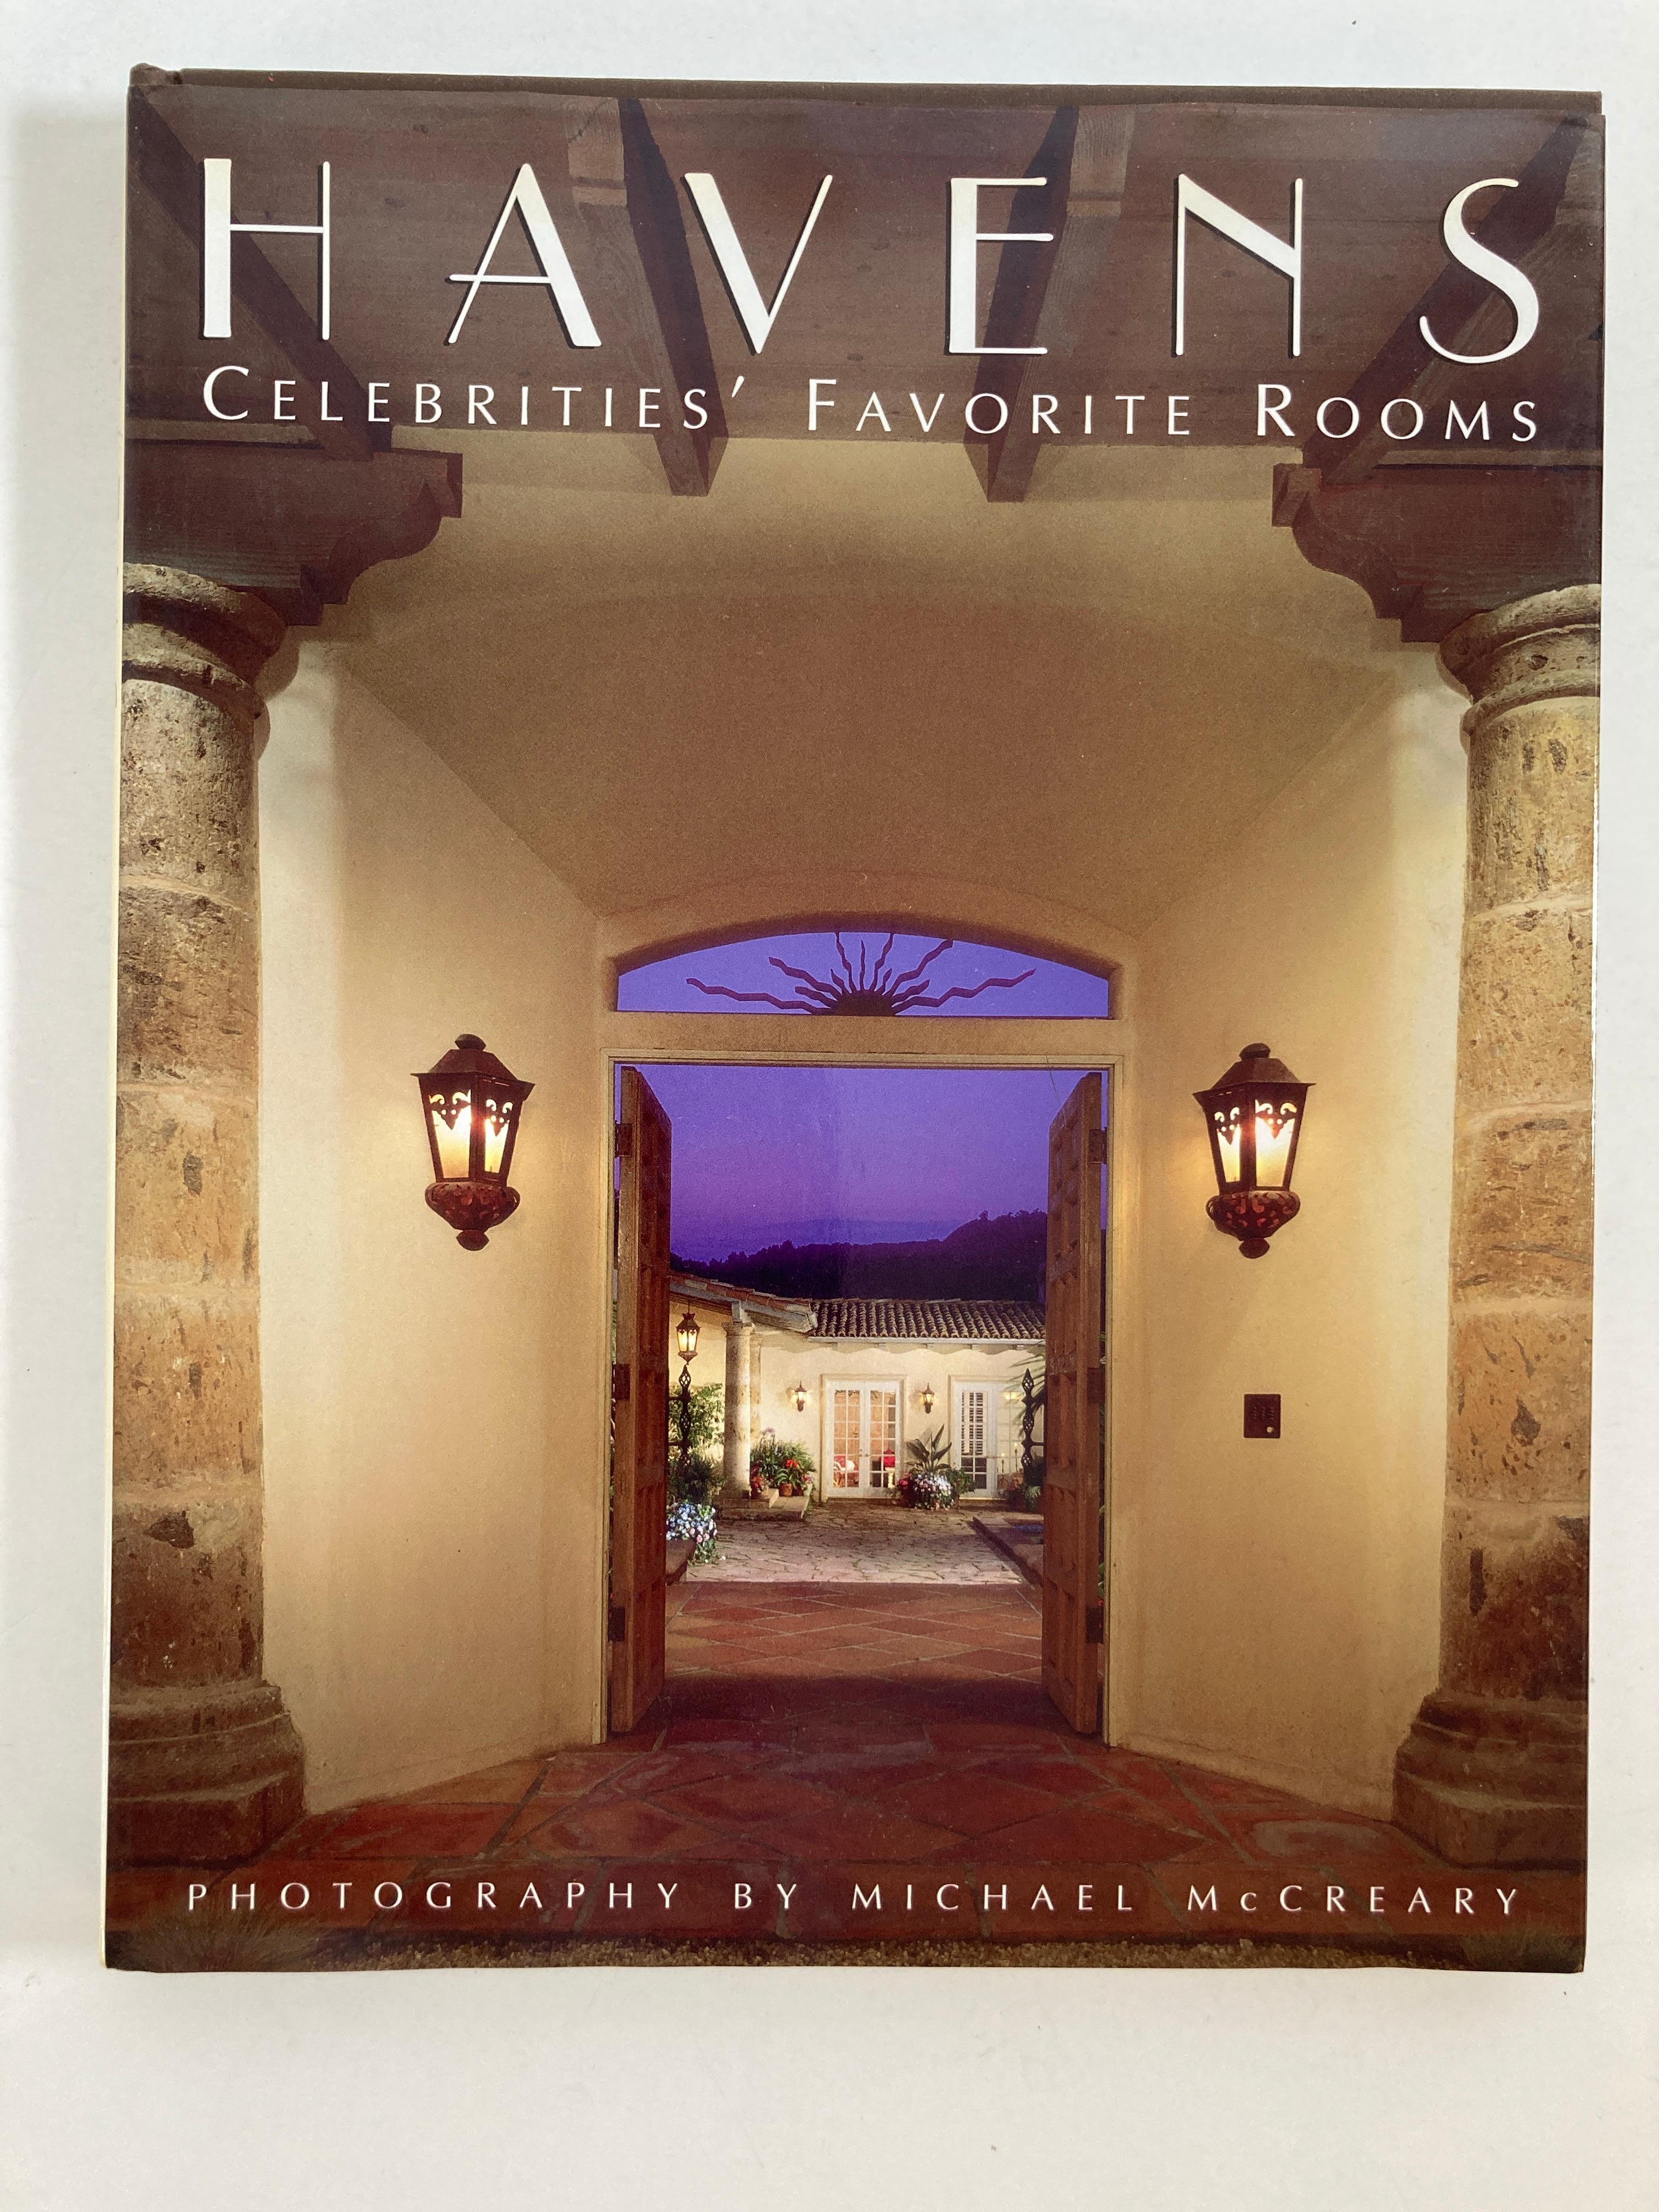 Havens: Celebrities' Favorite Rooms hardcover book
Havens: An intimate collection of exclusive photographs of celebrities and their favorite rooms
Michael McCreary
Where do celebrities go to escape the eyes of the watching world.
What do their